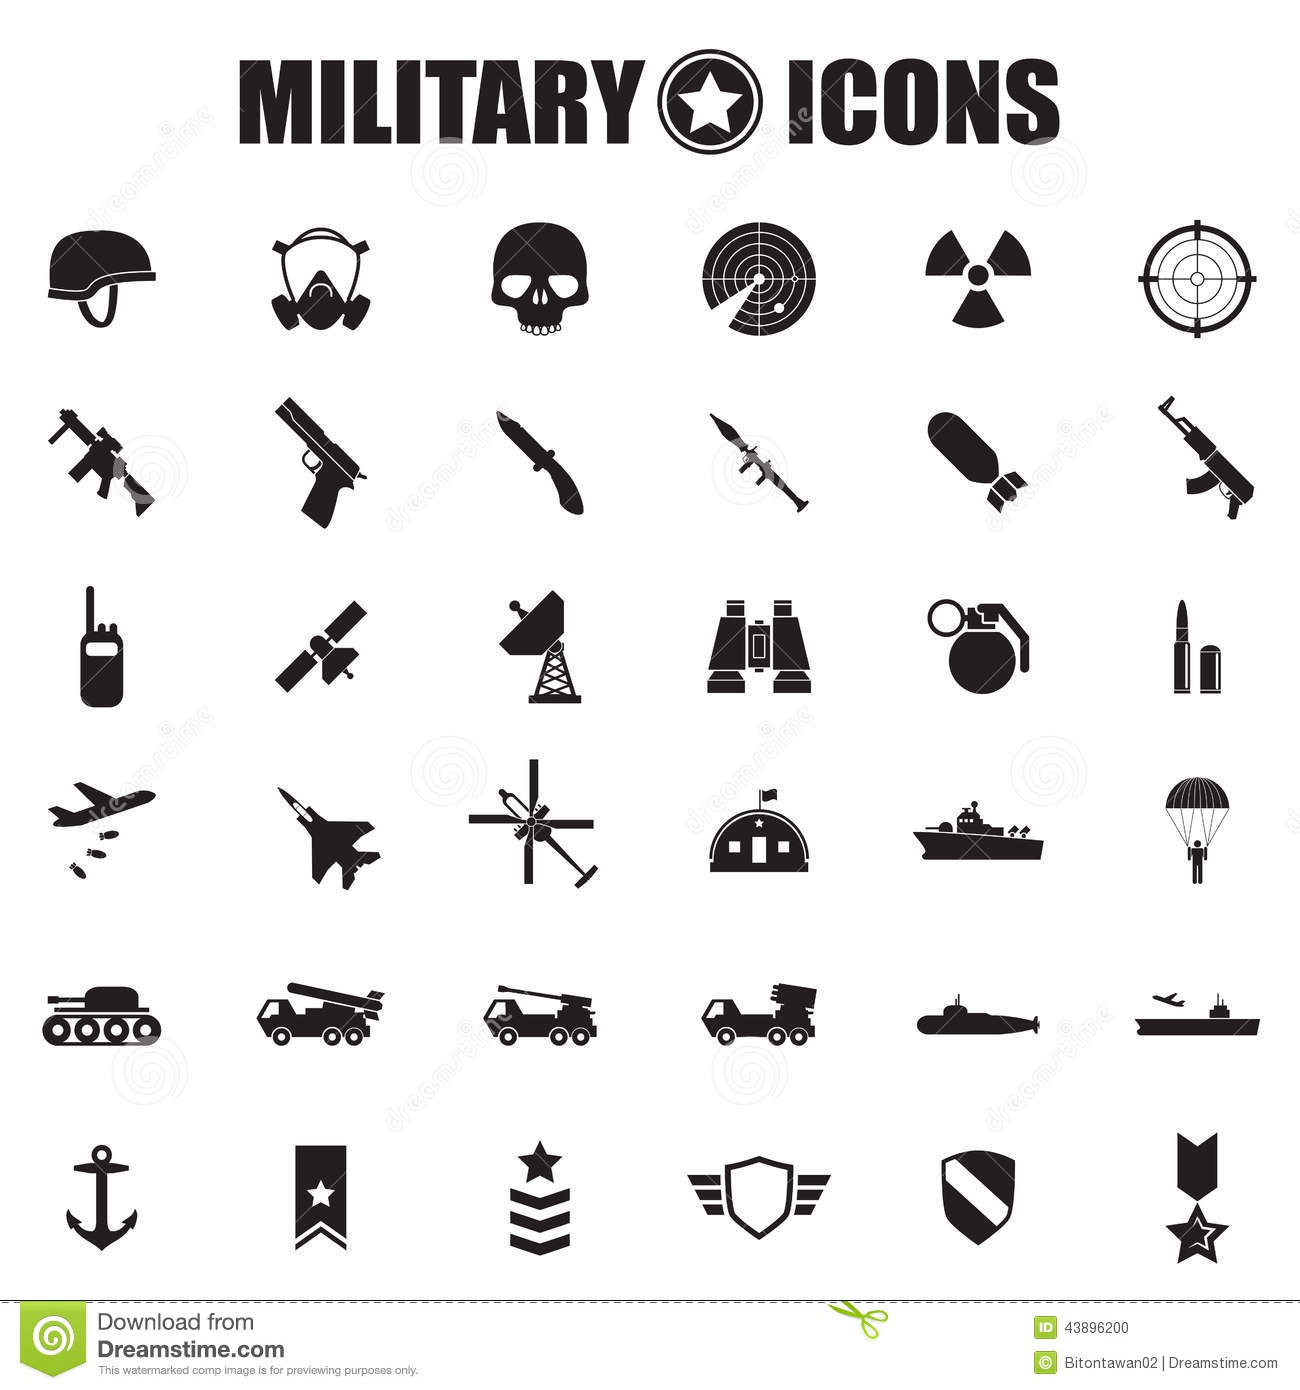 Military Icons and Symbols